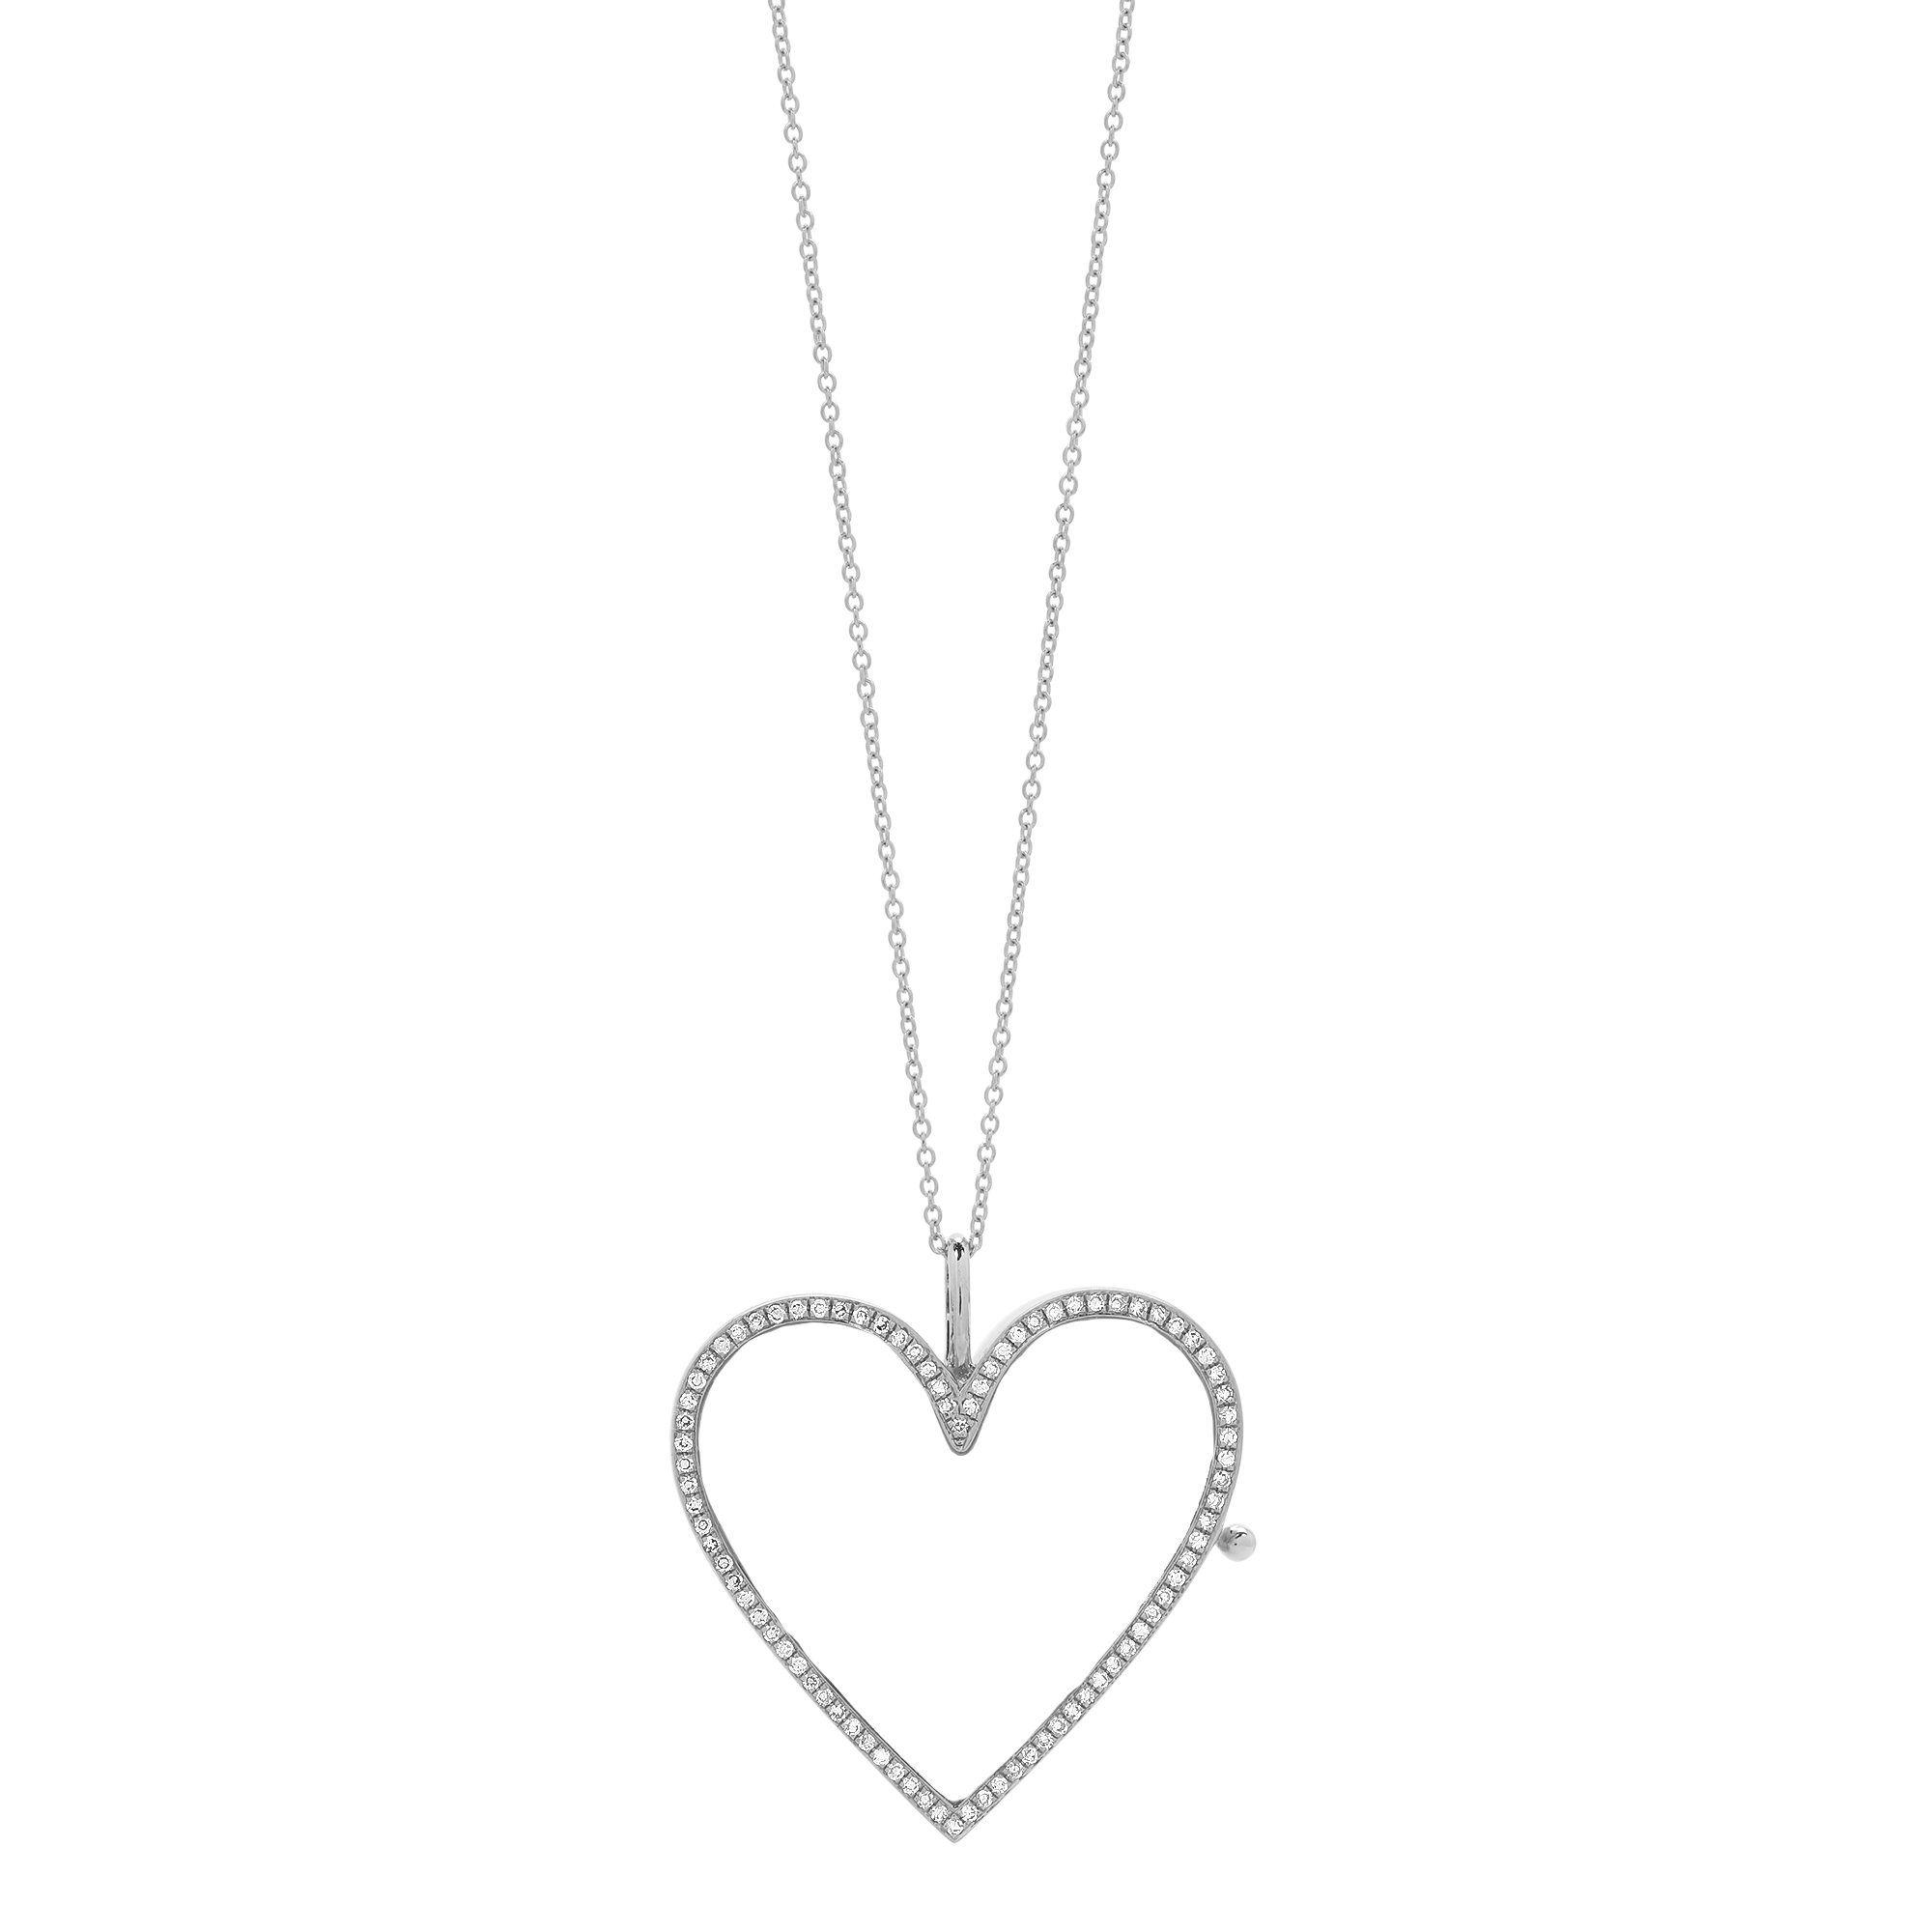 JustDesi Heart Locket Necklace in White Gold